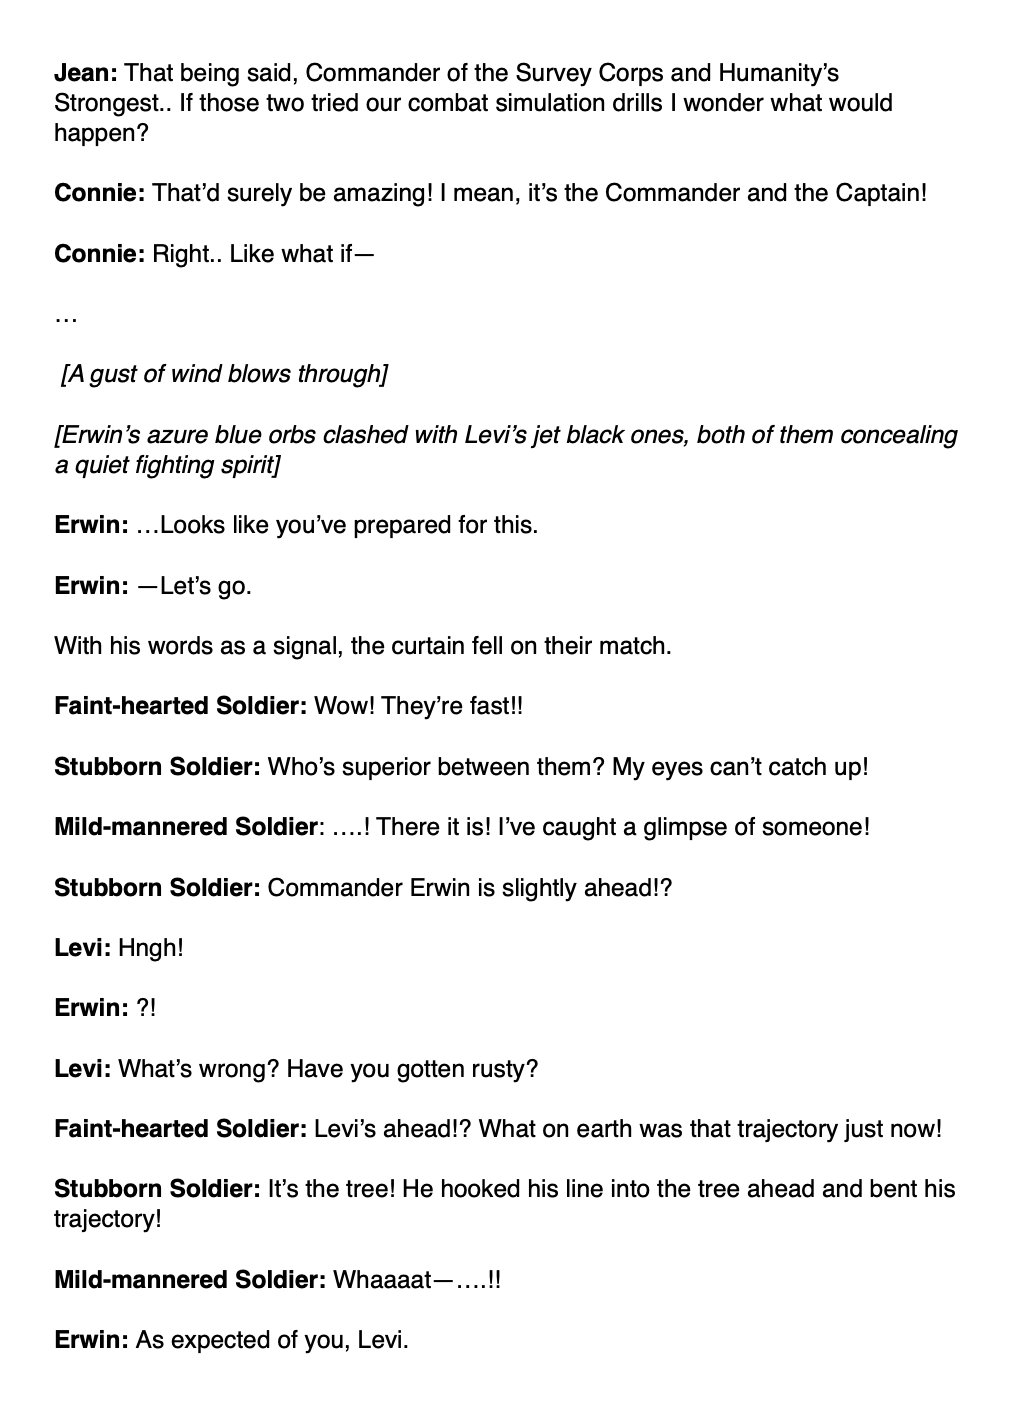 Lin Full Translation Of The Imaginary Erwin Vs Levi Showdown From The Aot Escape From Certain Death Dlc Aka Connie S Eruri Fanfiction Part 1 T Co P9pwfs6nr5 Twitter